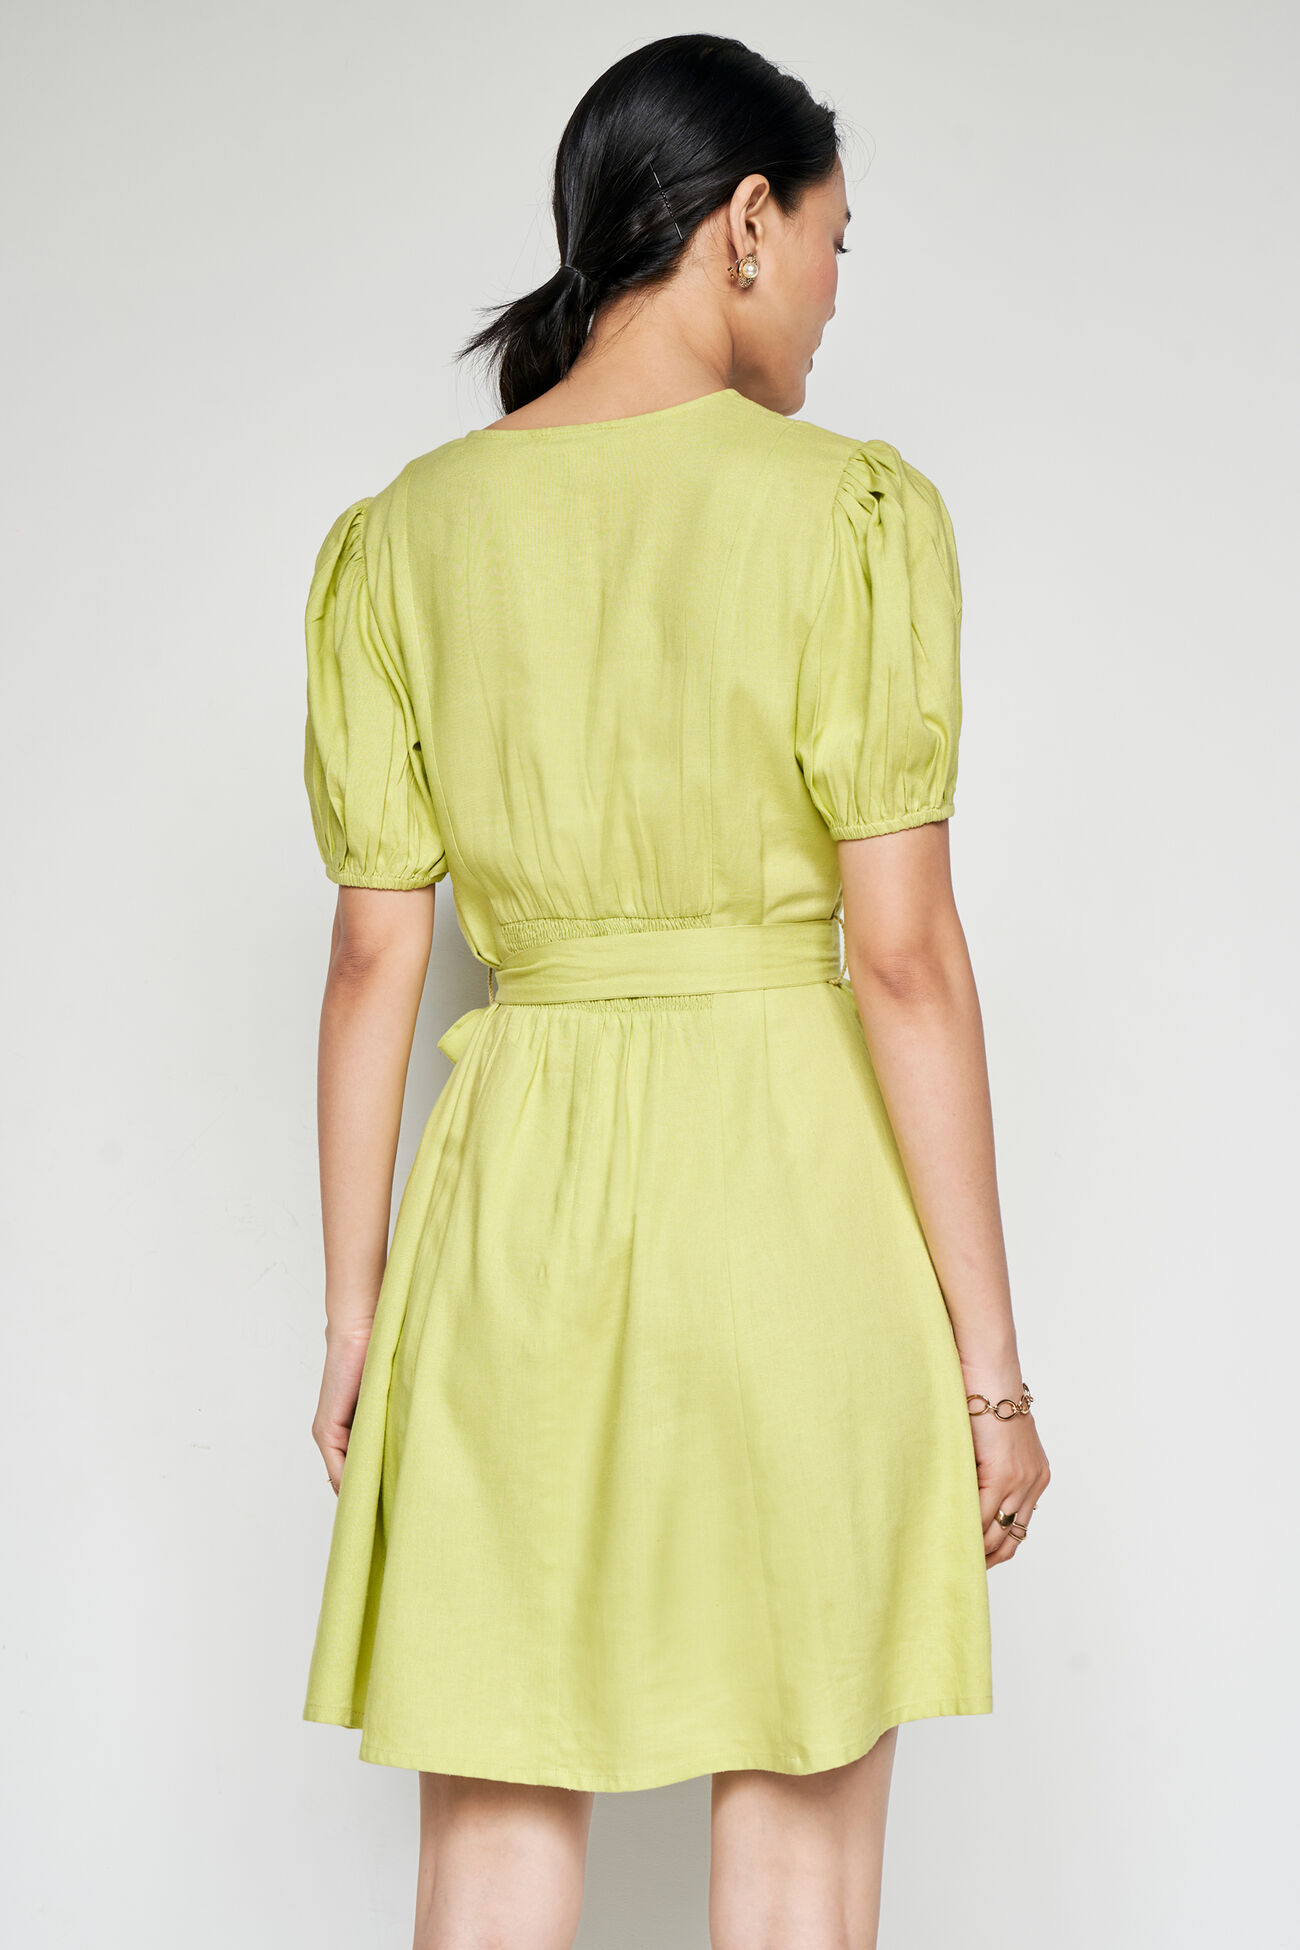 Star In Your Eyes Dress, Lime Green, image 8